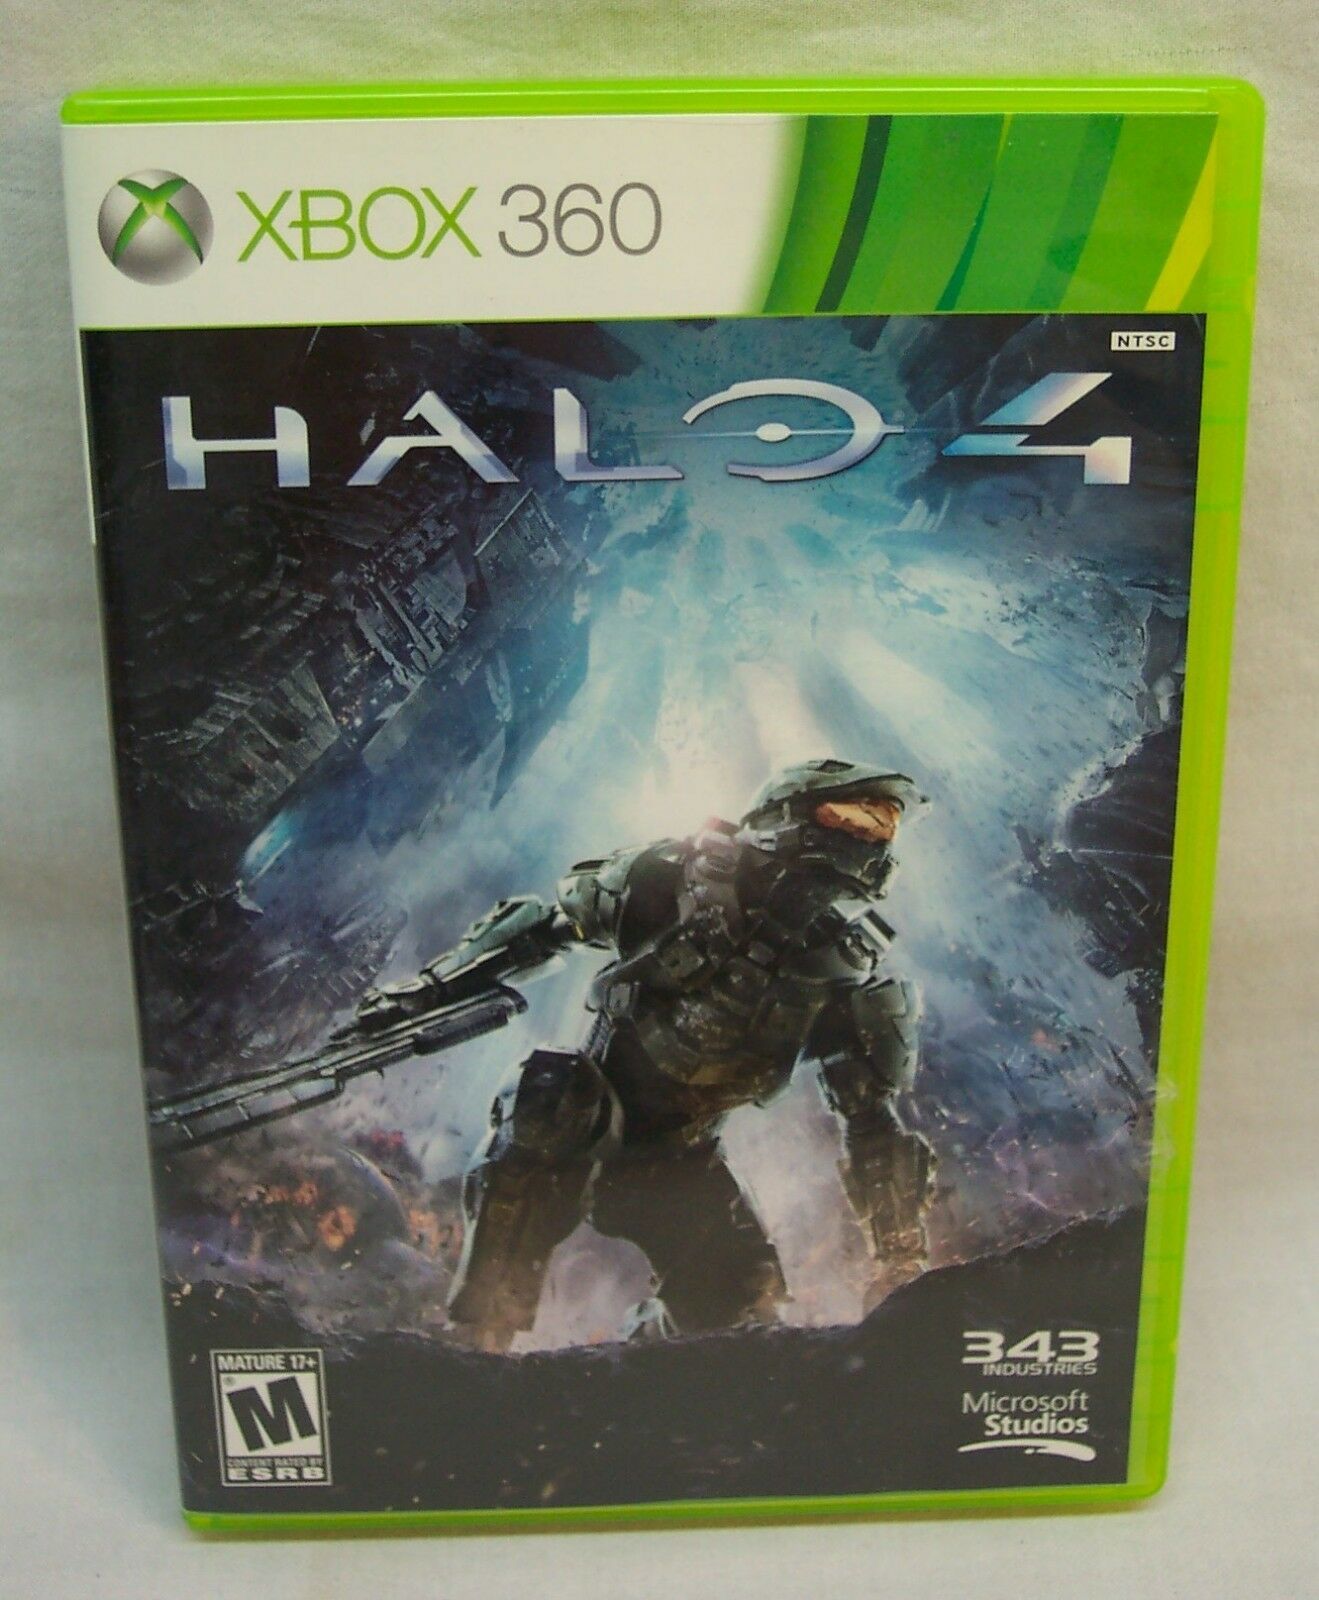 Halo 4 Microsoft Xbox 360 VIDEO GAME COMPLETE - Video Games